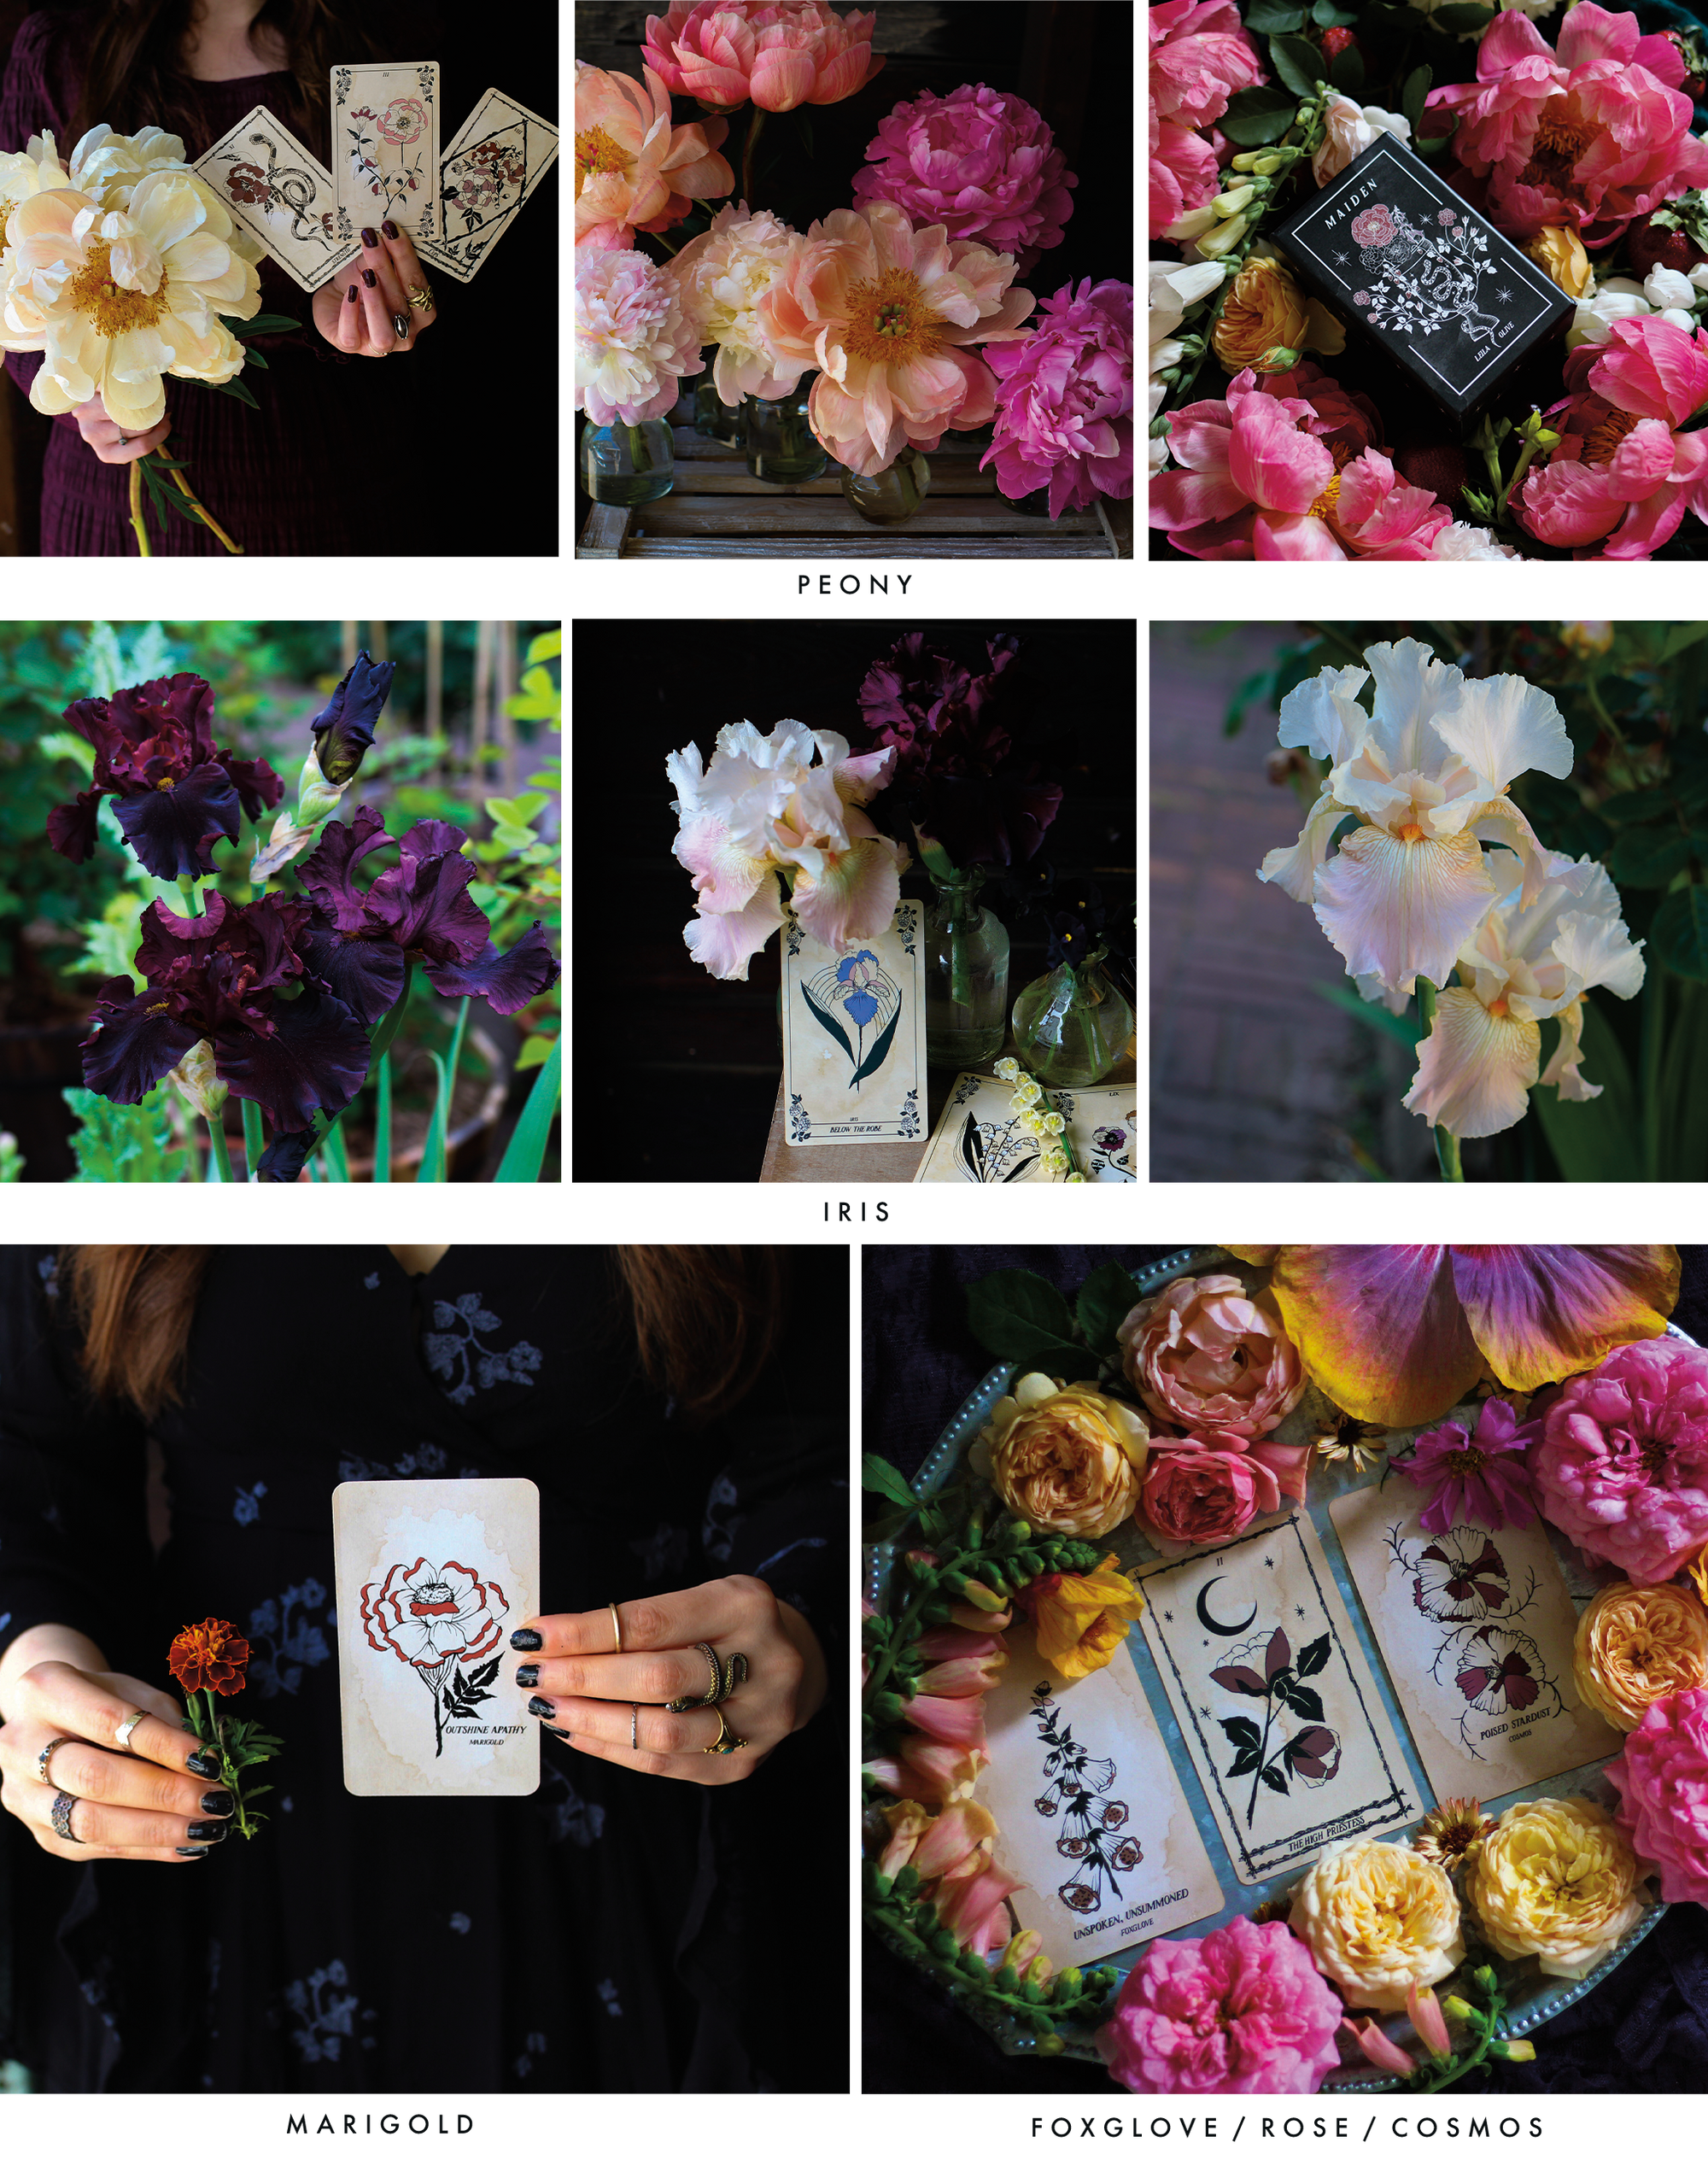 Floral Tarot card decks, hand-painted and rooted in classical Tarot interpretations, meant to flourish amid the garden and provide the wisdom of plants..